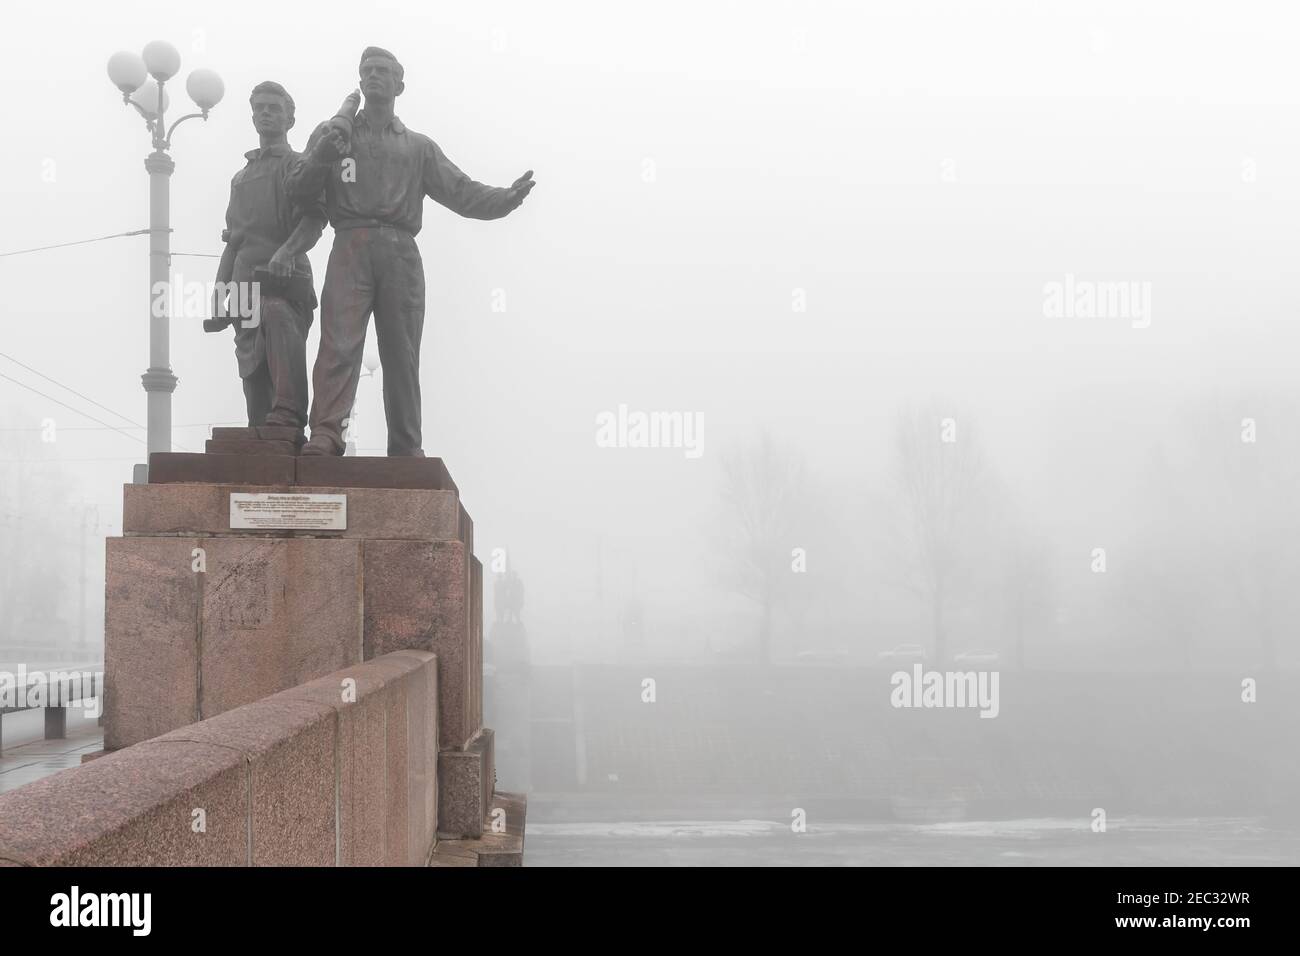 Vilnius, Lithuania - February 23, 2014: Historical image of Soviet sculptures on Green Bridge in fog. Soviet era statues were removed on 19 July 2015, Stock Photo